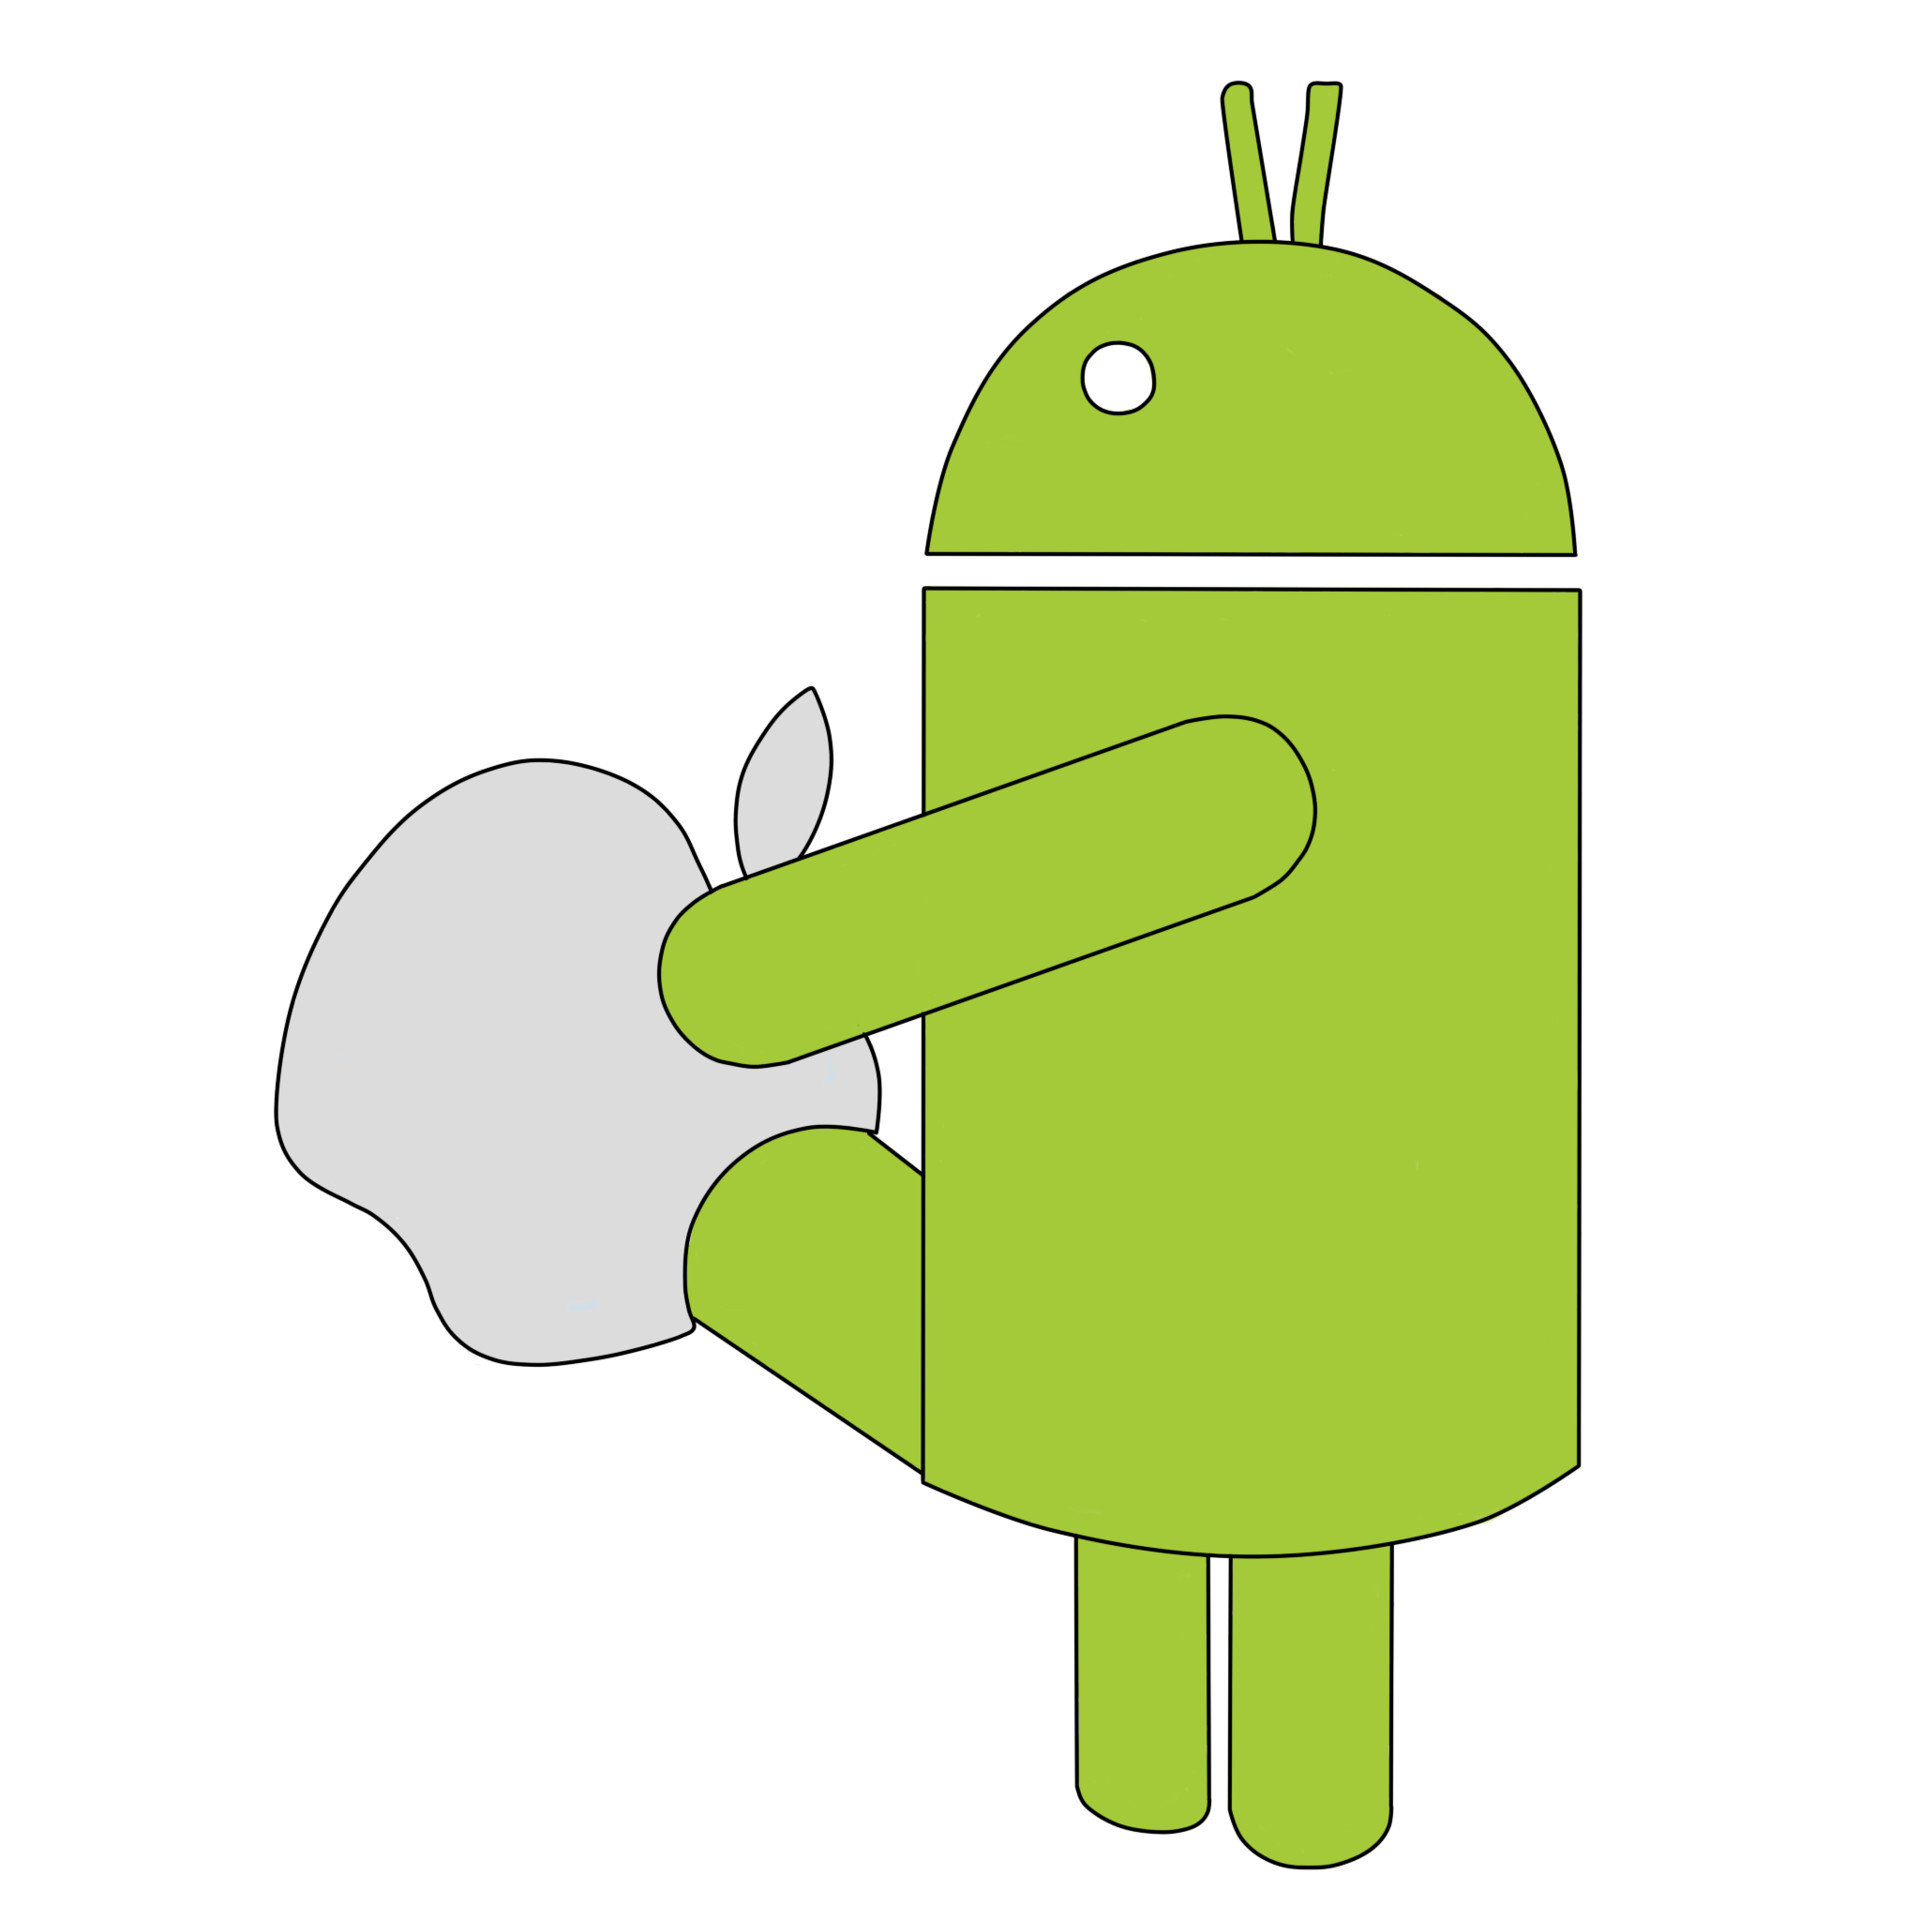 Flying Cookie - Apple and Android logo